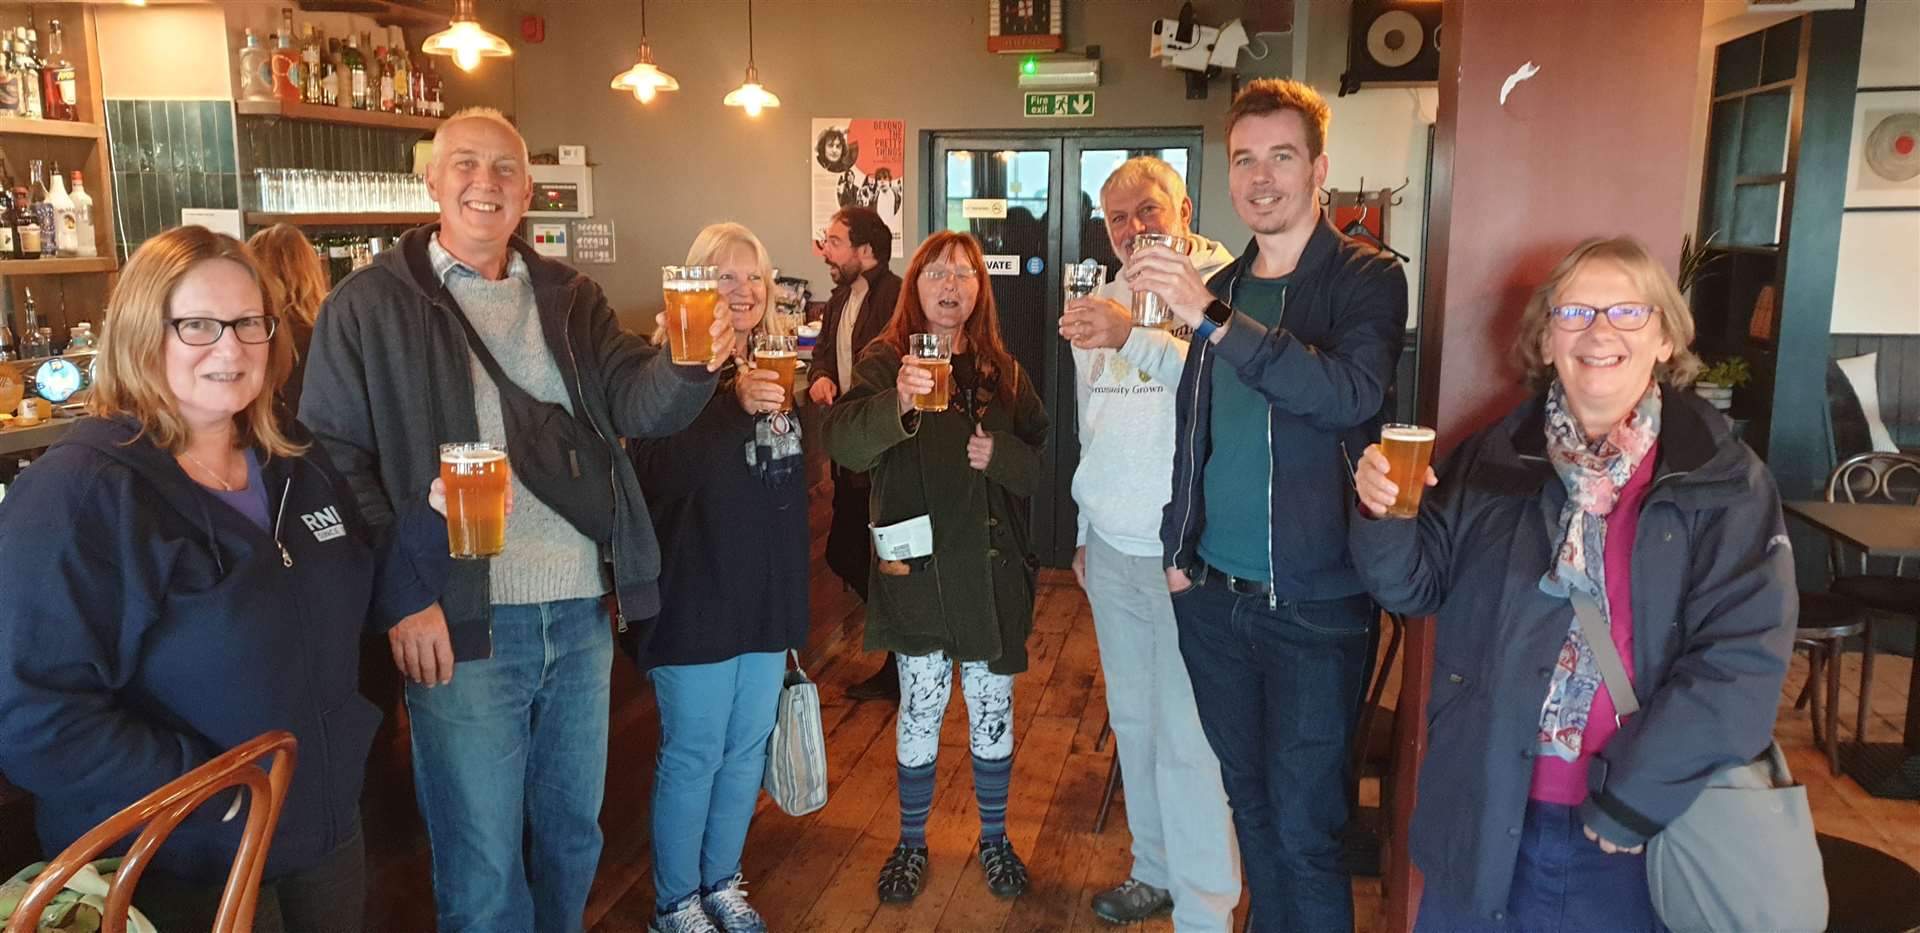 Deal Hop Farm members sampling the 2021 Green Hop beer at the Lighthouse pub